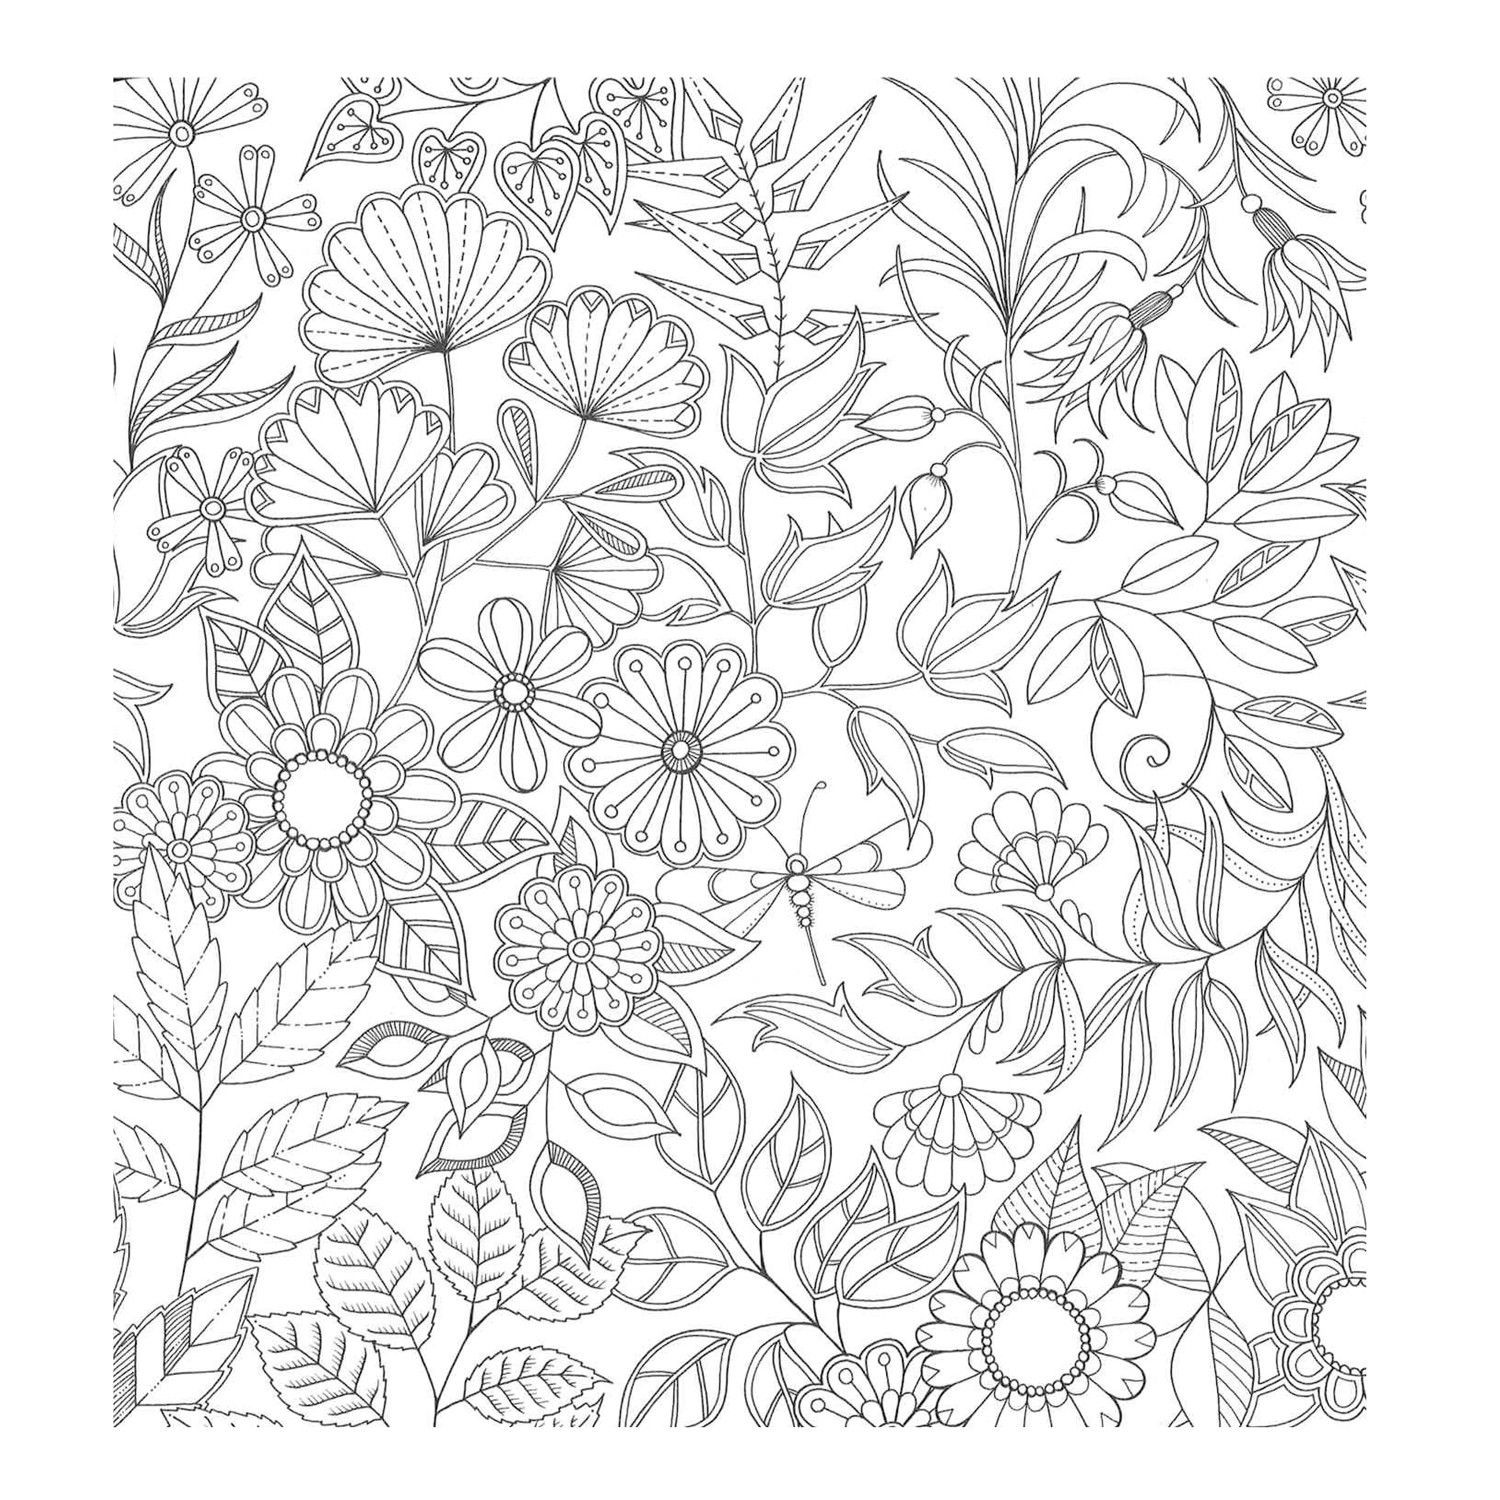 Secret Garden Coloring Pages Coloring Home Take a peek at this great artwork on johanna basford's colouring gallery! secret garden coloring pages coloring